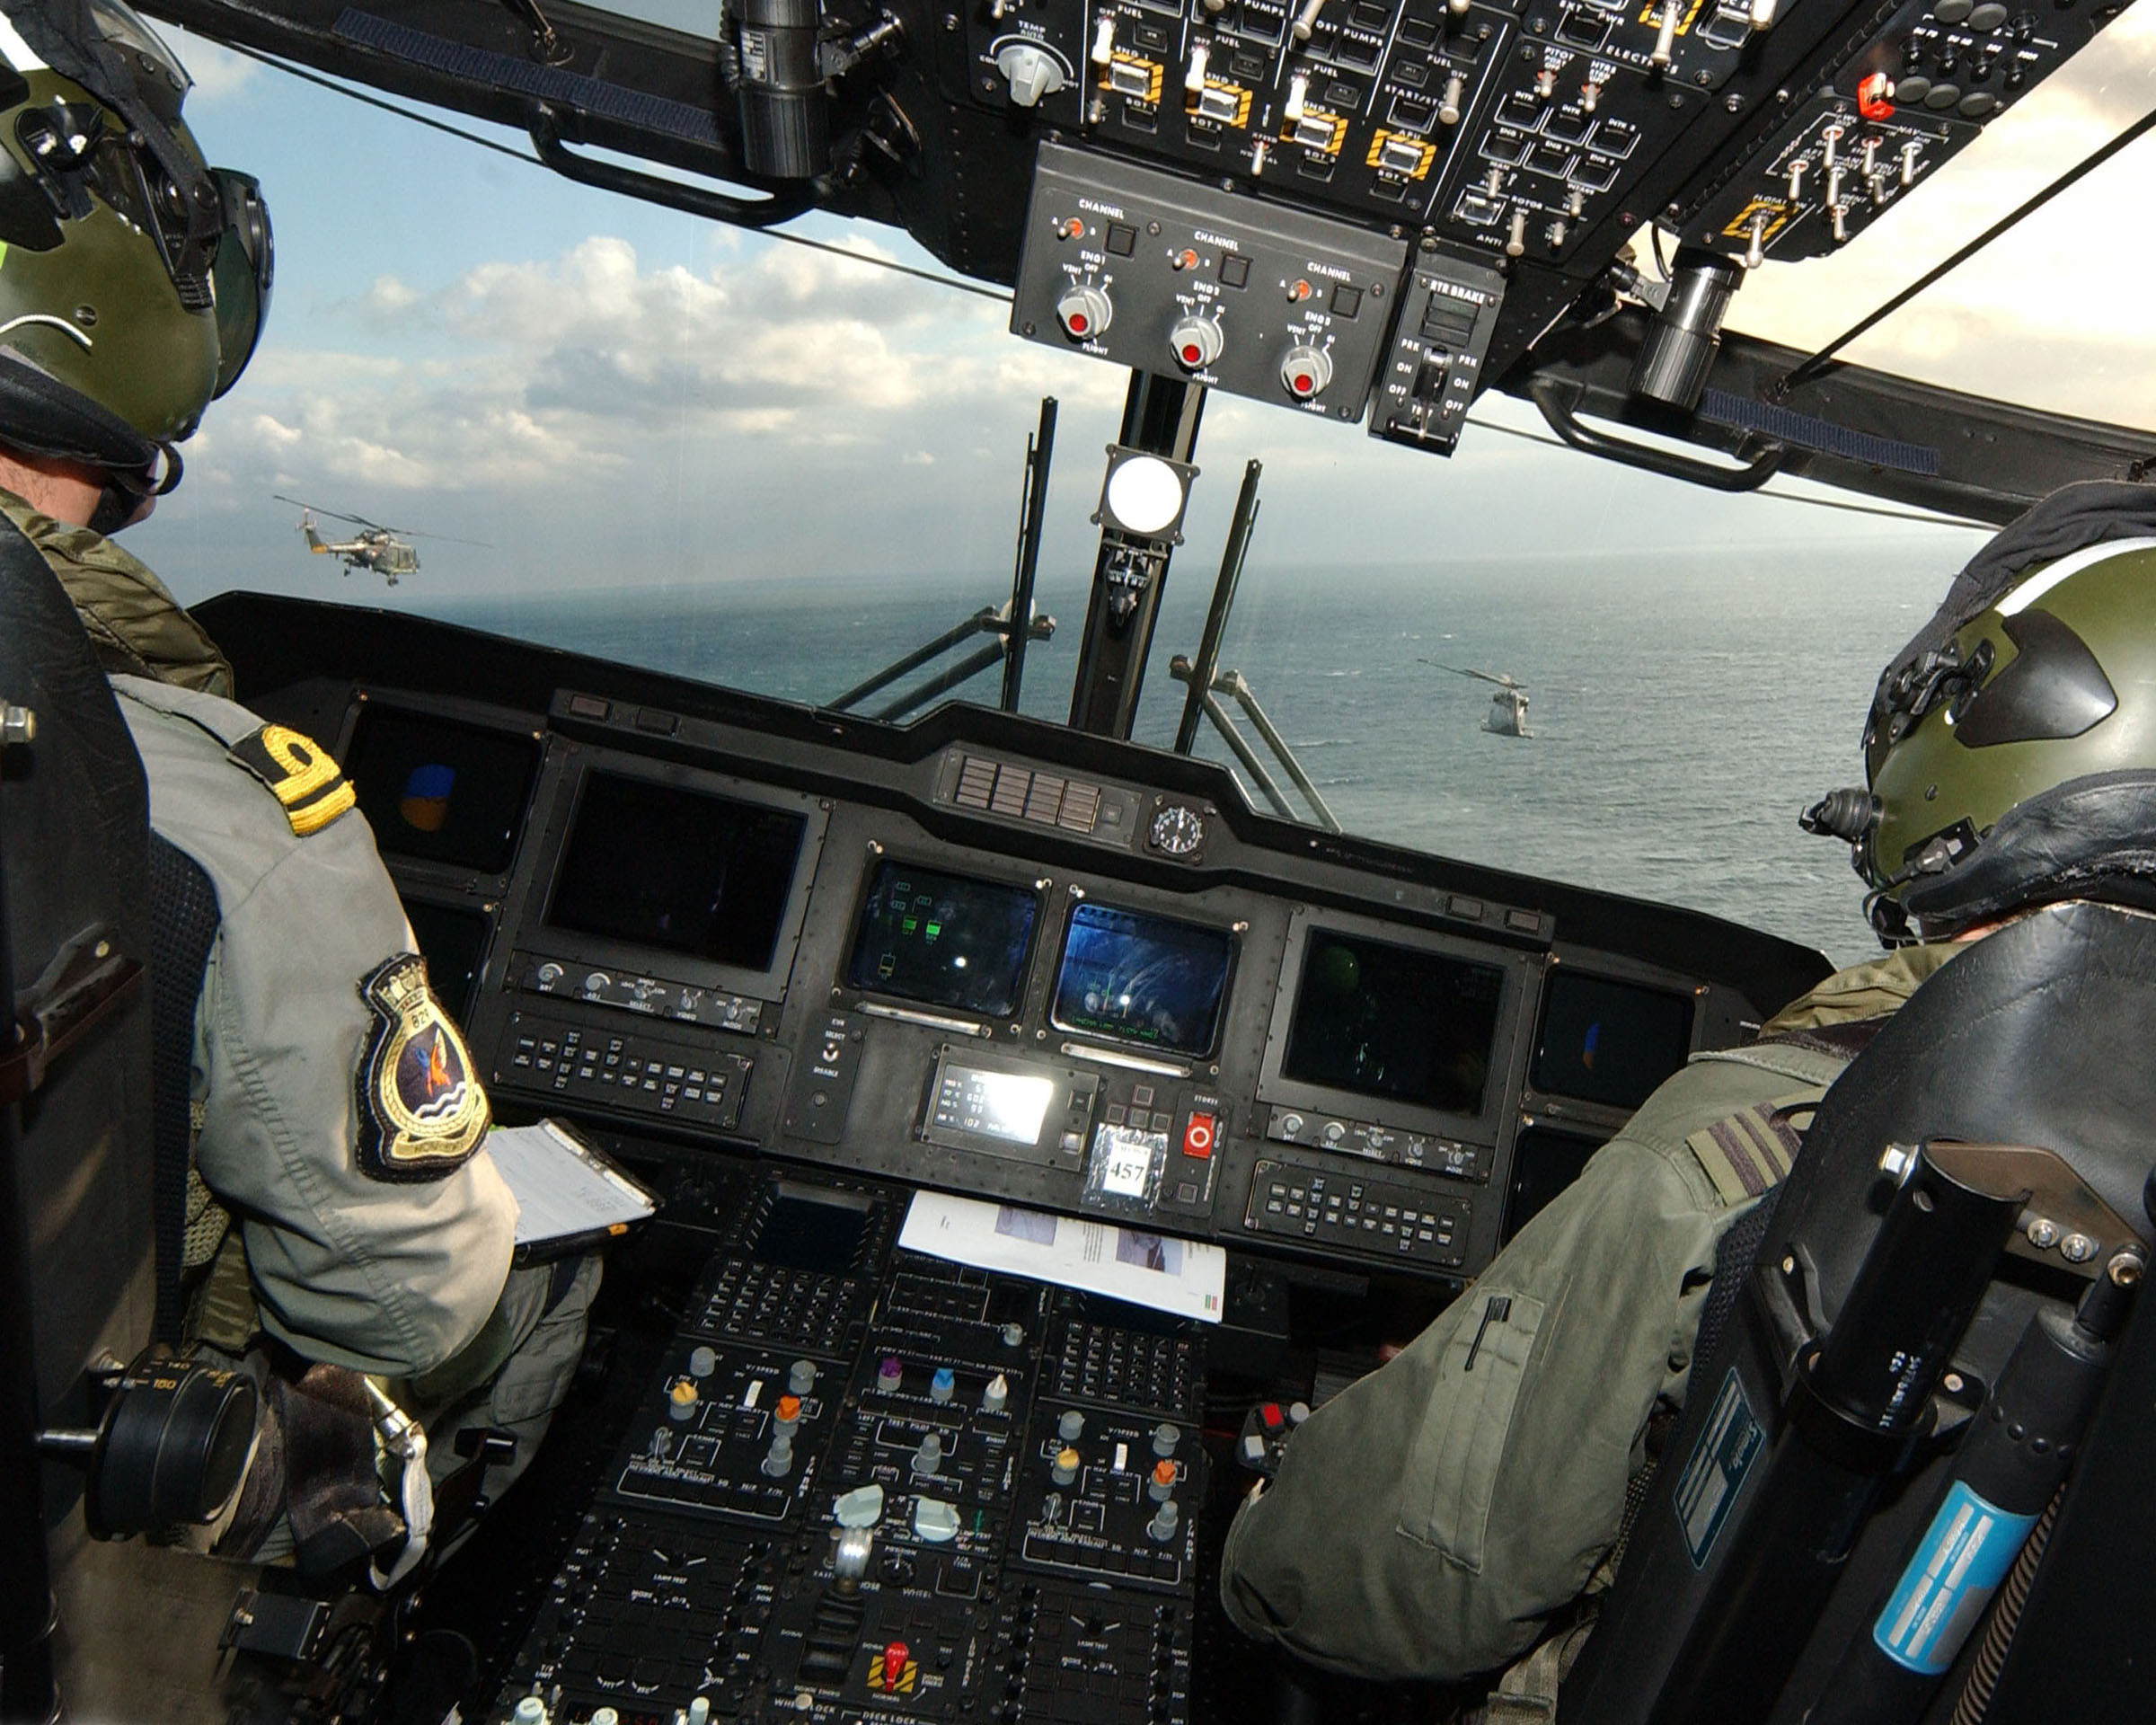 Two Dutch Naval Lynx helicopters were pictured from the cockpit of a Royal Naval Merlin helicopter of 829 Naval Air Squadron, based at RNAS Culdrose, during HMS Northumberland's family day 2005. MOD 45145976